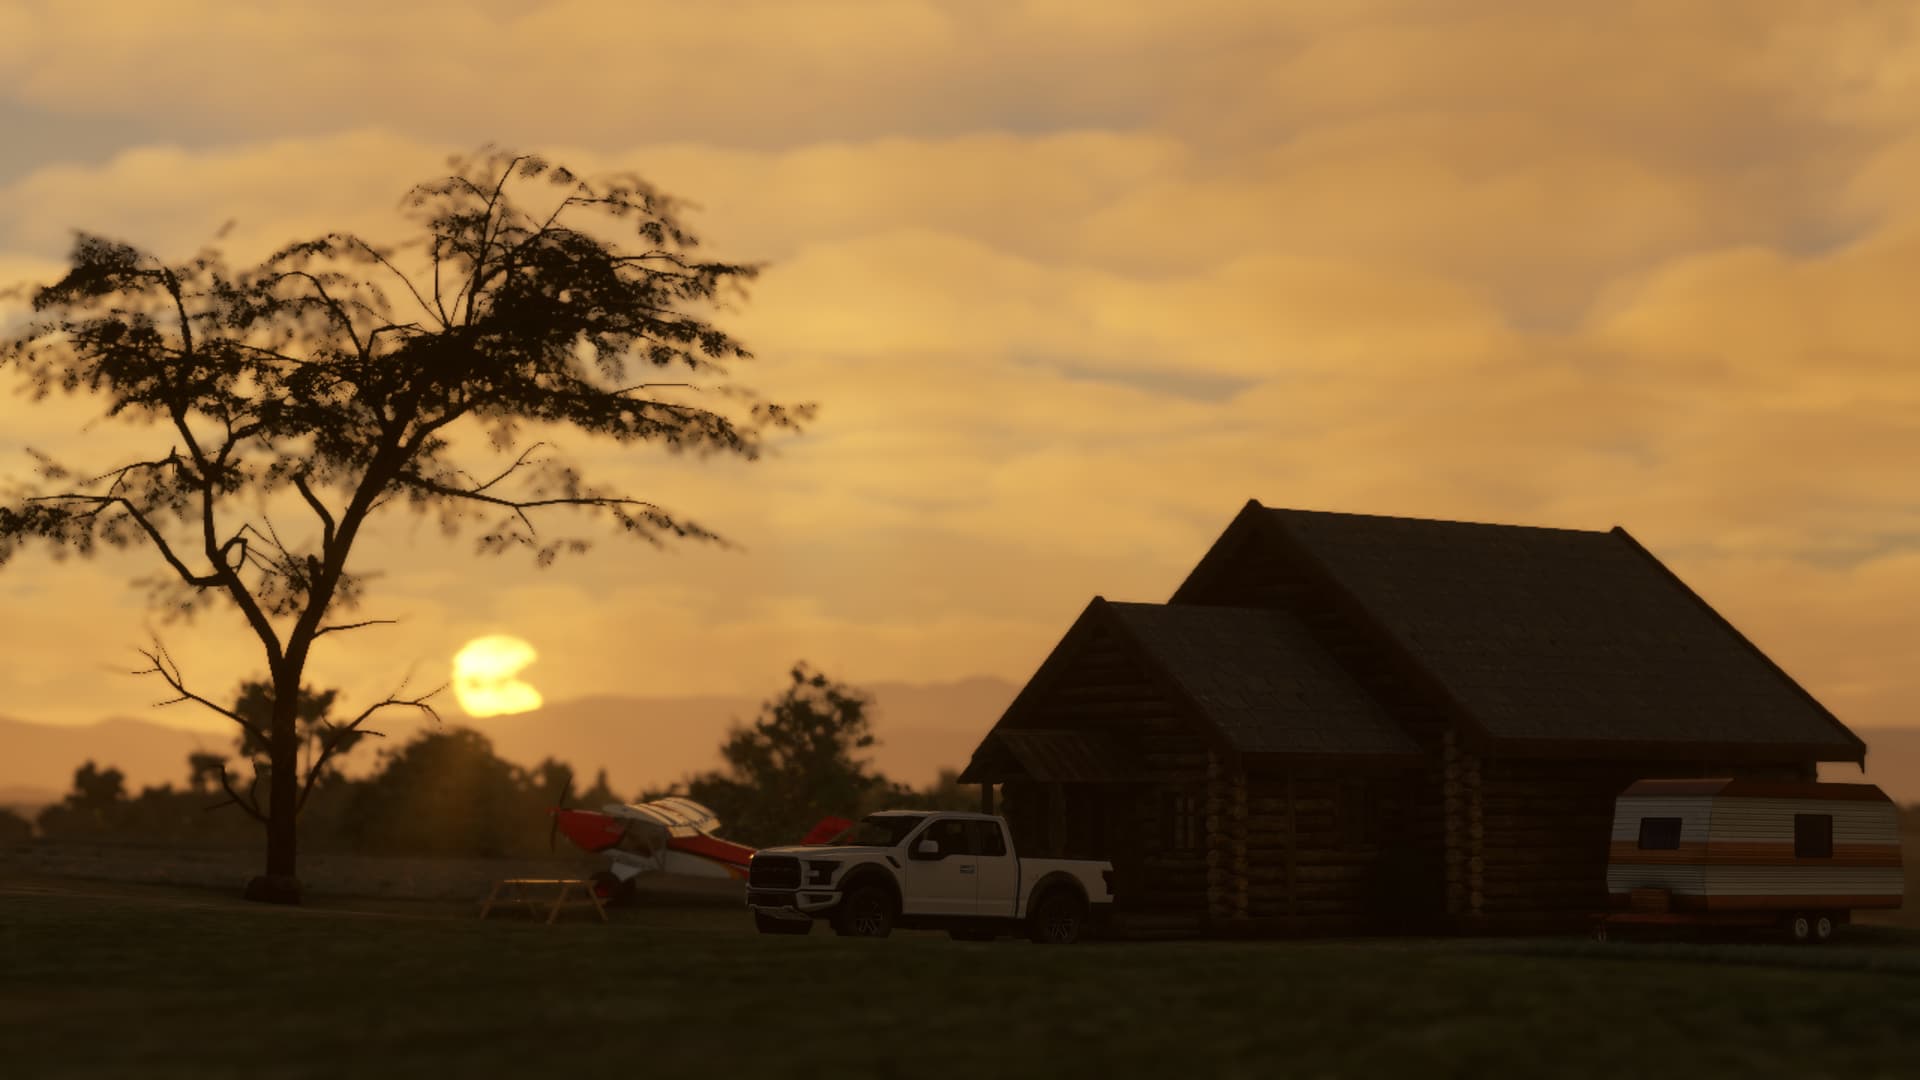 The sun sets in the background of a country lodge with vehicles parked outside